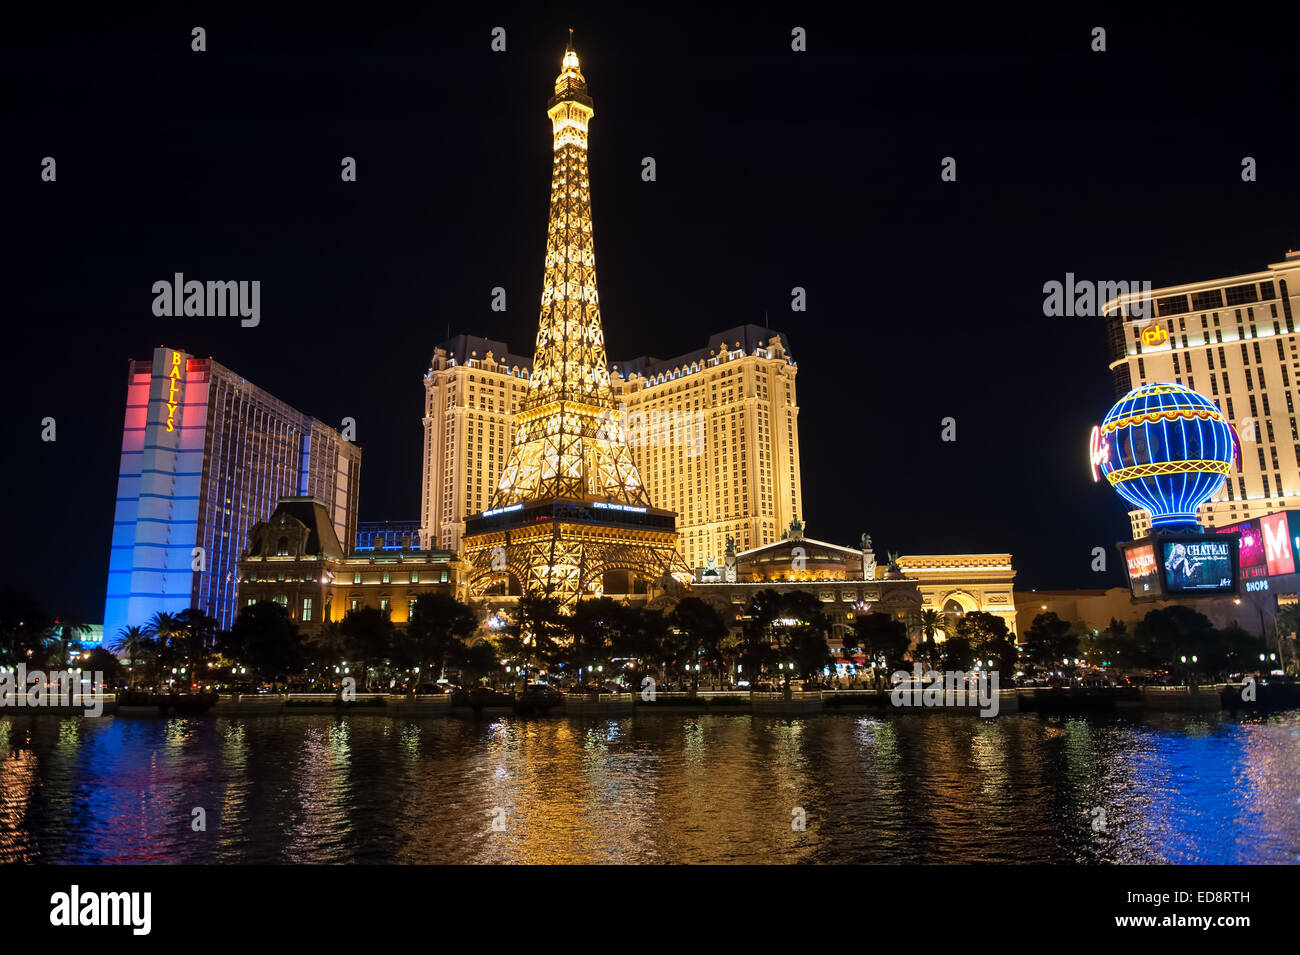 Las Vegas Boulevard by night with Paris Las Vegas and Bally's hotels and casinos as seen over the lake at Bellagio. Stock Photo